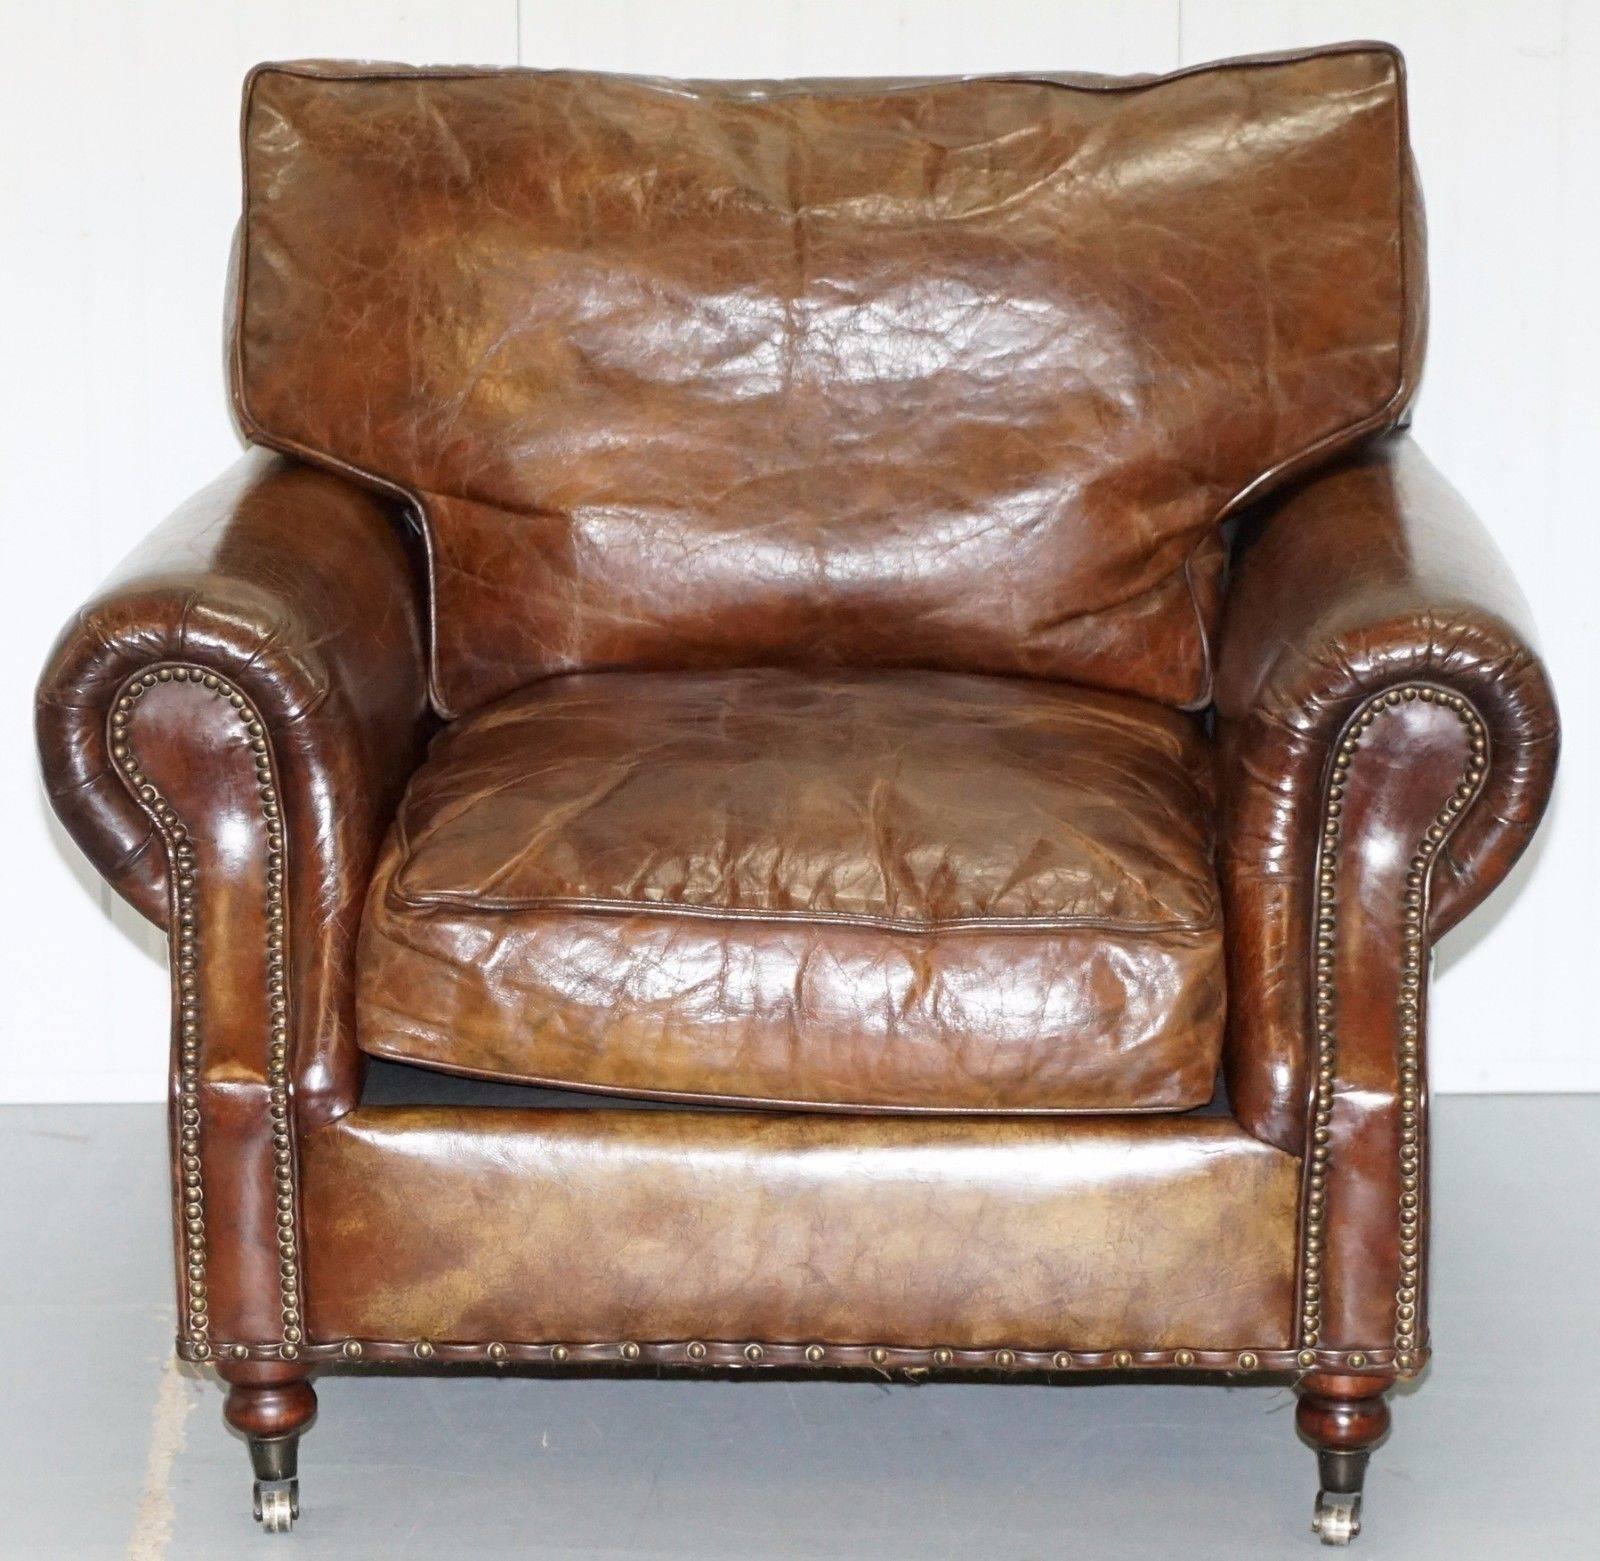 Wimbledon-Furniture is delighted to offer for sale this stunning vintage heritage aged brown leather Timothy Oulton Balmoral club armchair with feather filled cushions RRP £1650

I have the matching three-seat sofa which will be listed shortly, if